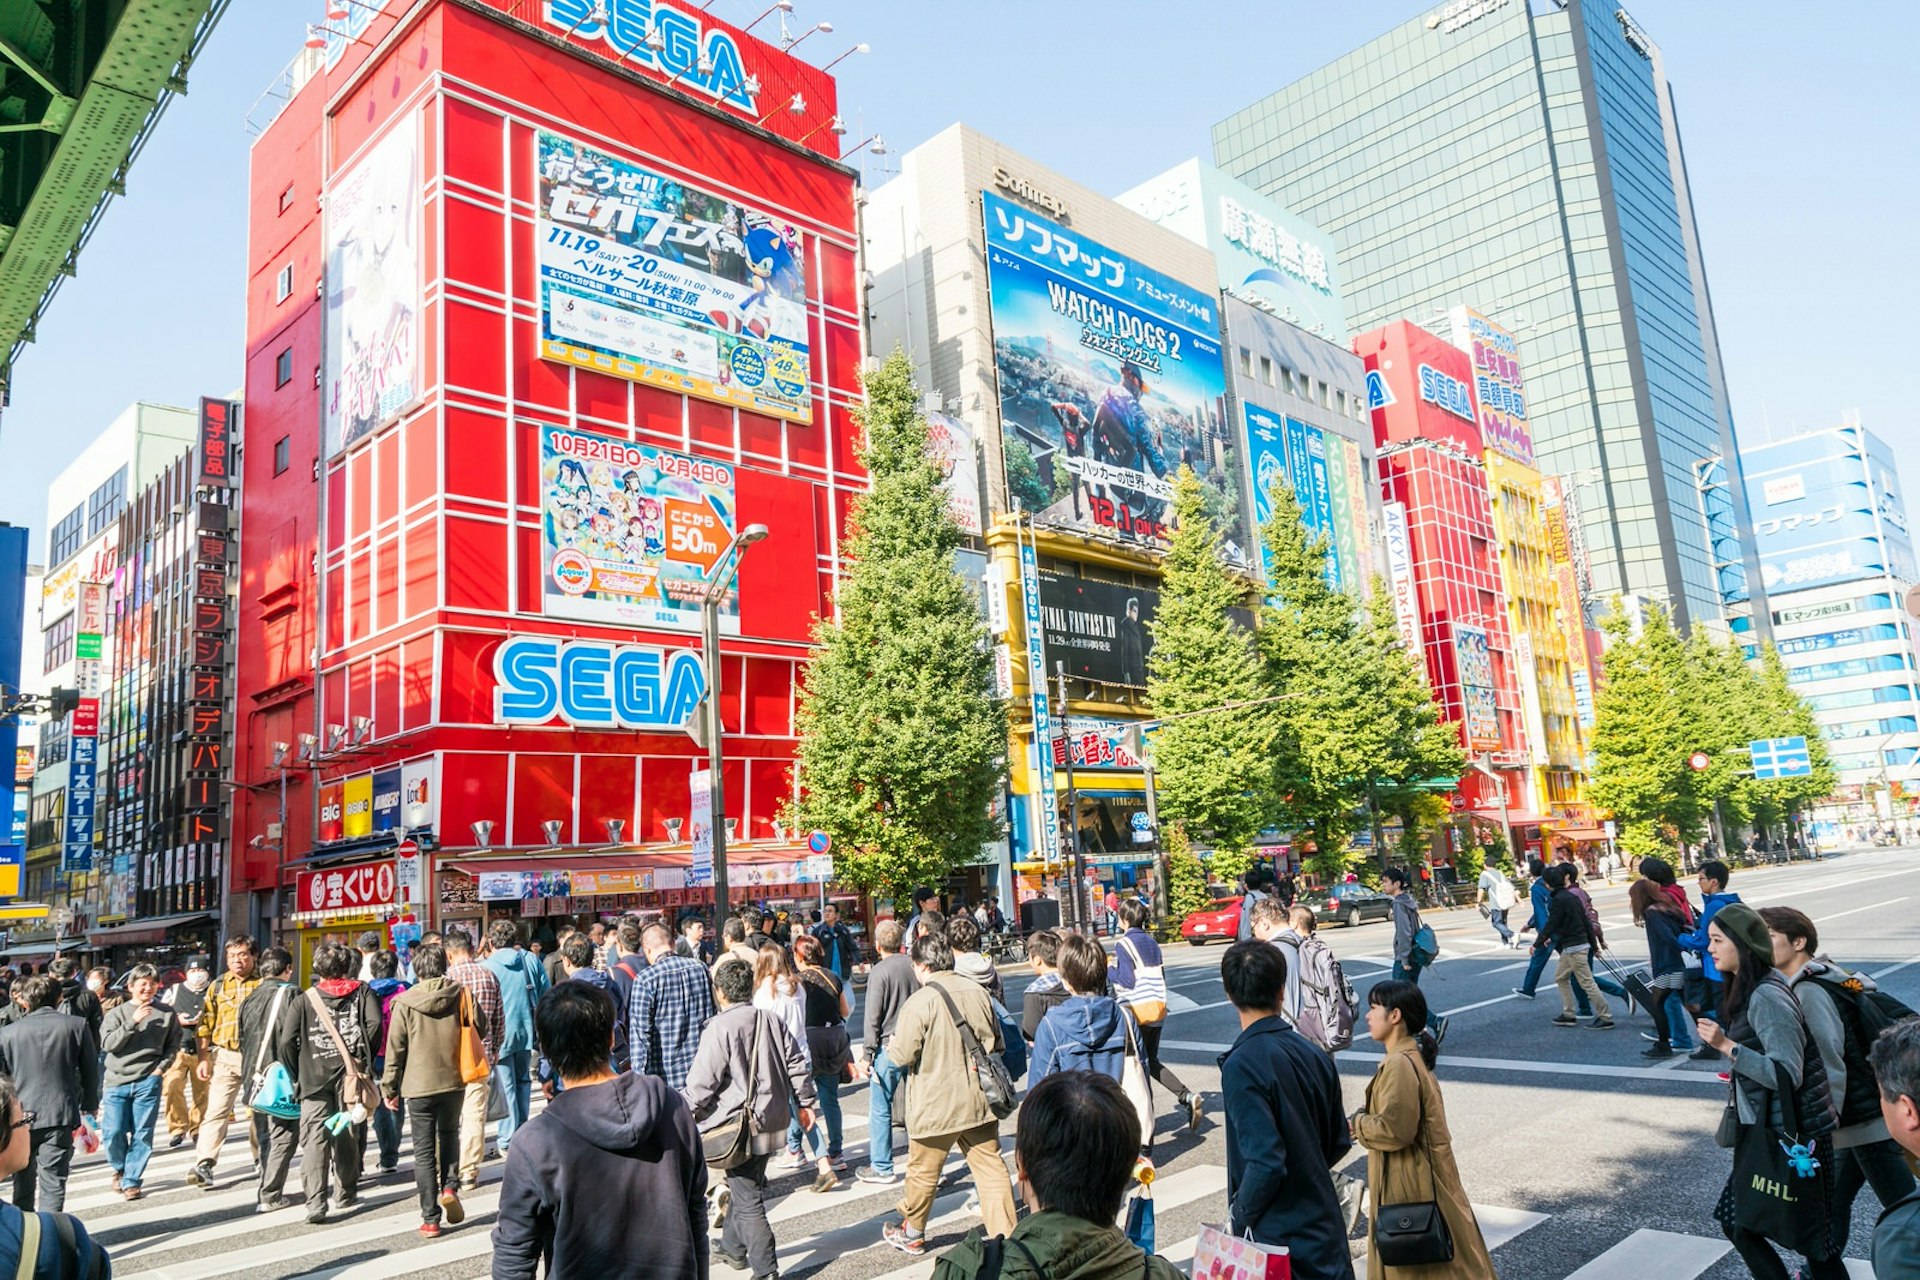 A busy daytime street in Akihabara, lined with large stores showing signs for games, anime and manga © Blue Planet Studio / Shutterstock